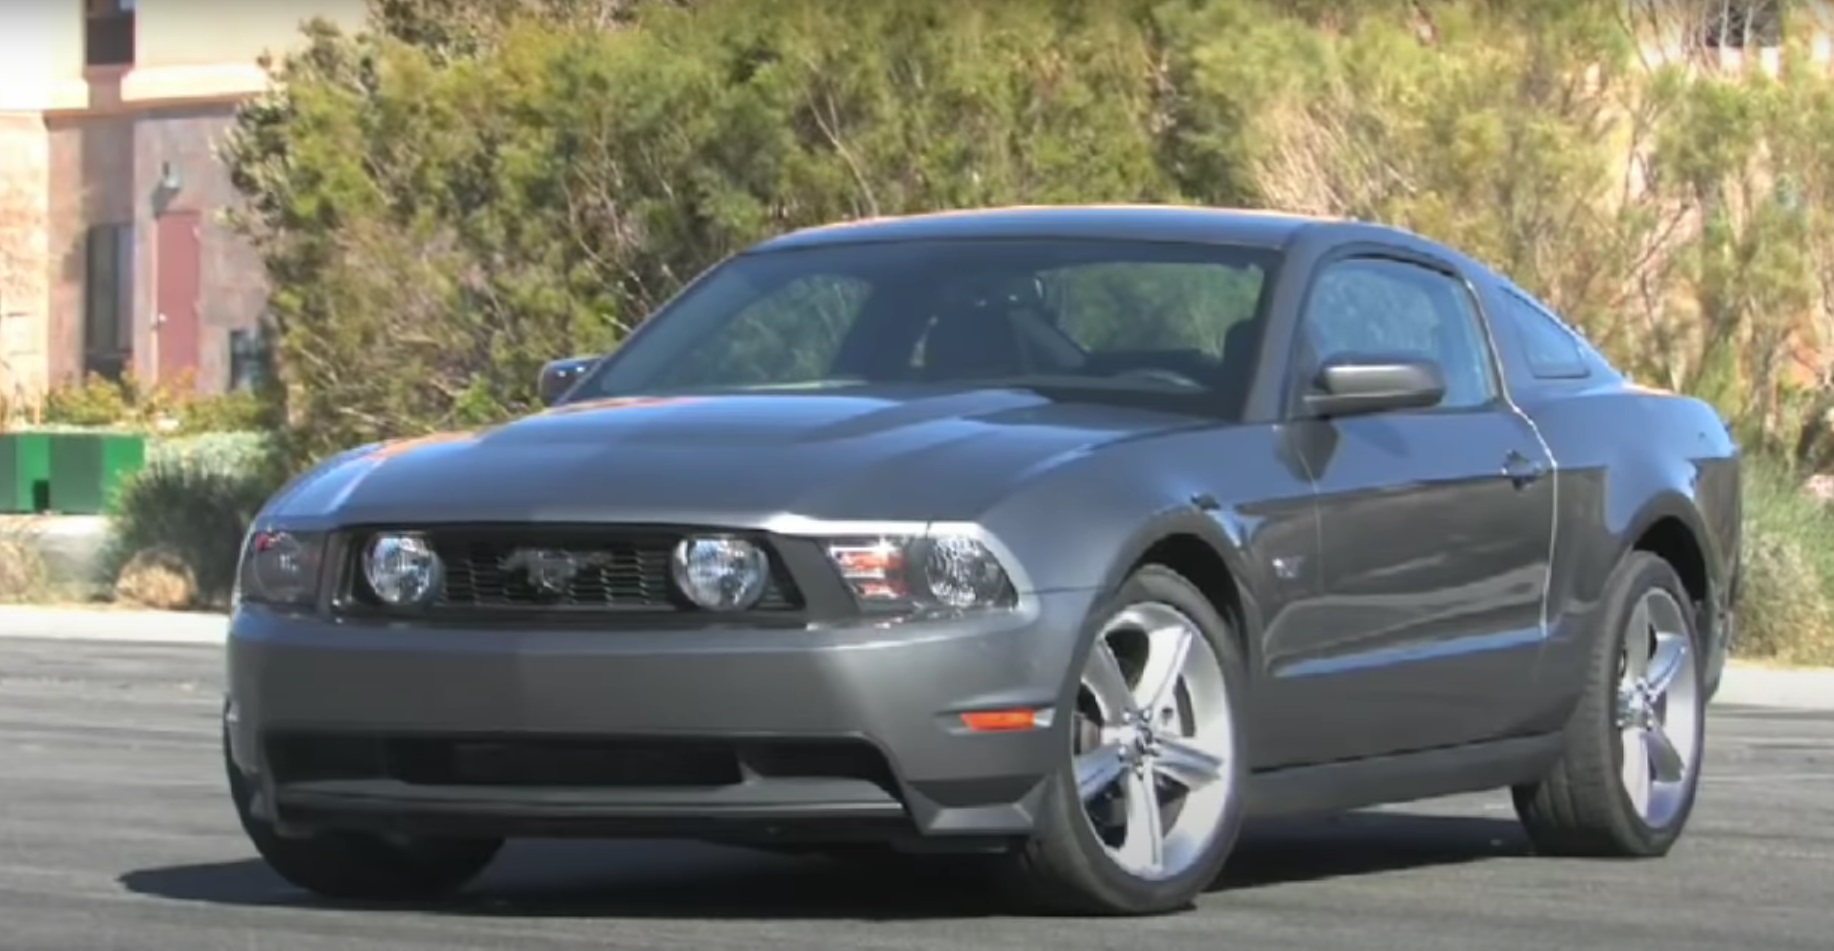 Video: 2010 Ford Mustang GT vs 2010 Chevy Camaro SS vs 2009 Dodge Challenger R/T